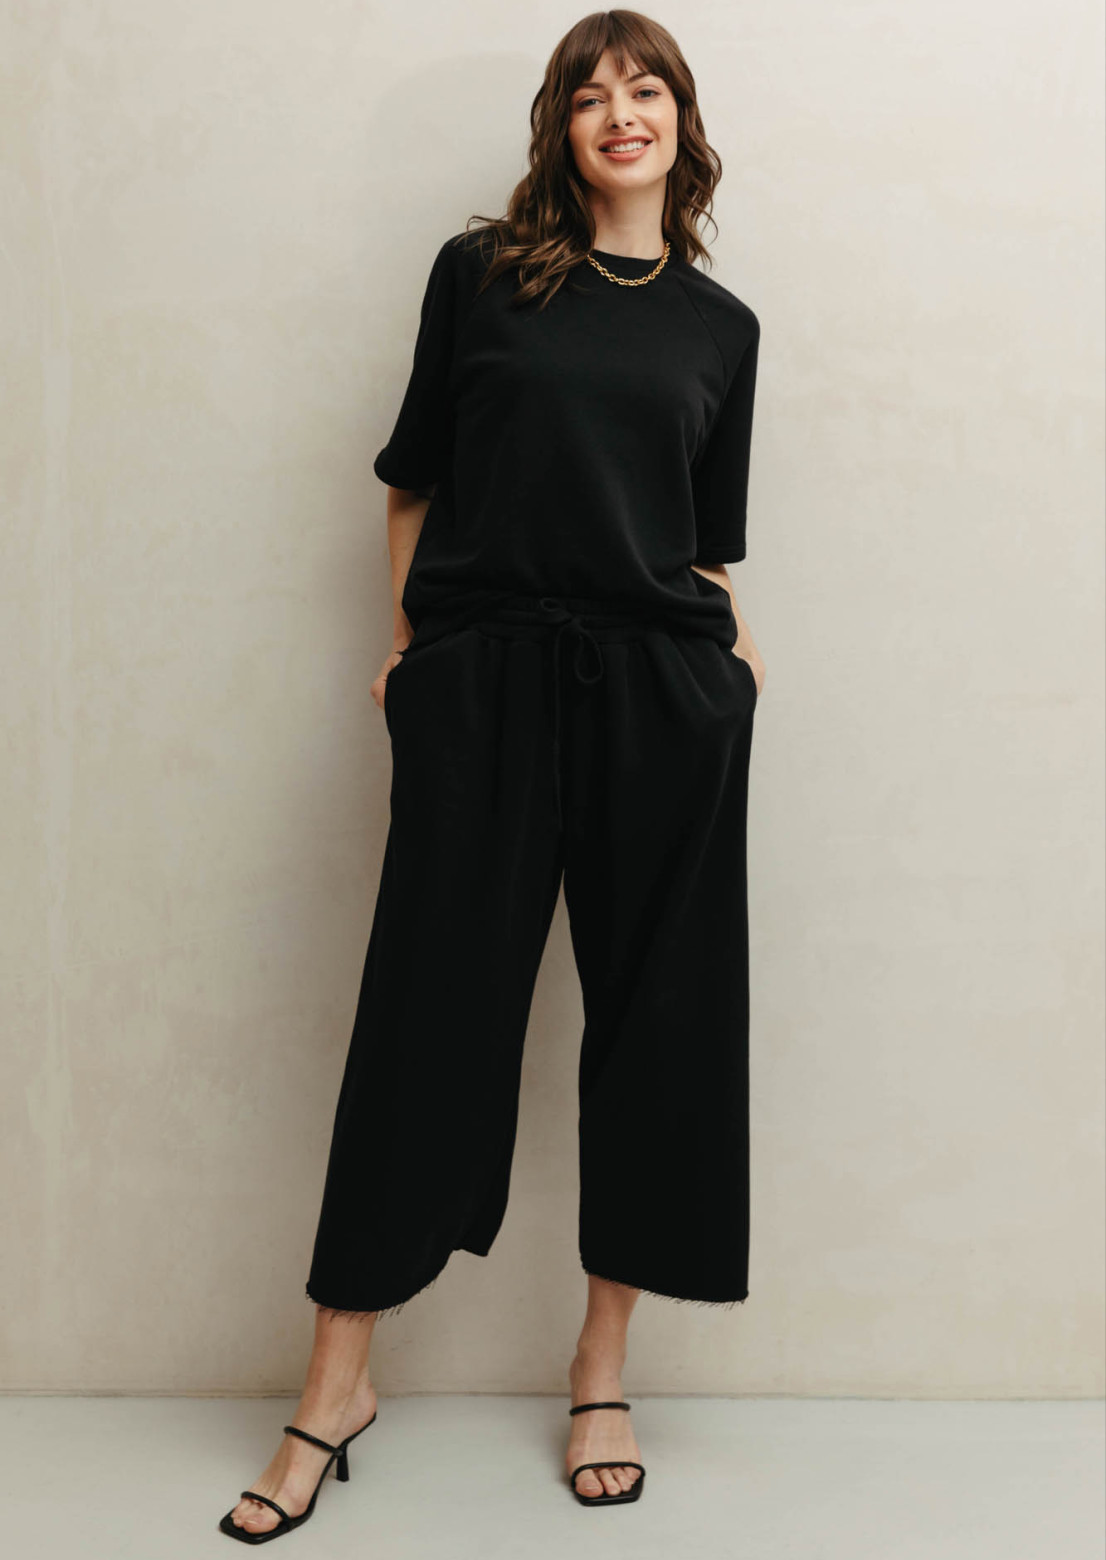 Dark night color three-thread suit with culottes and T-shirt